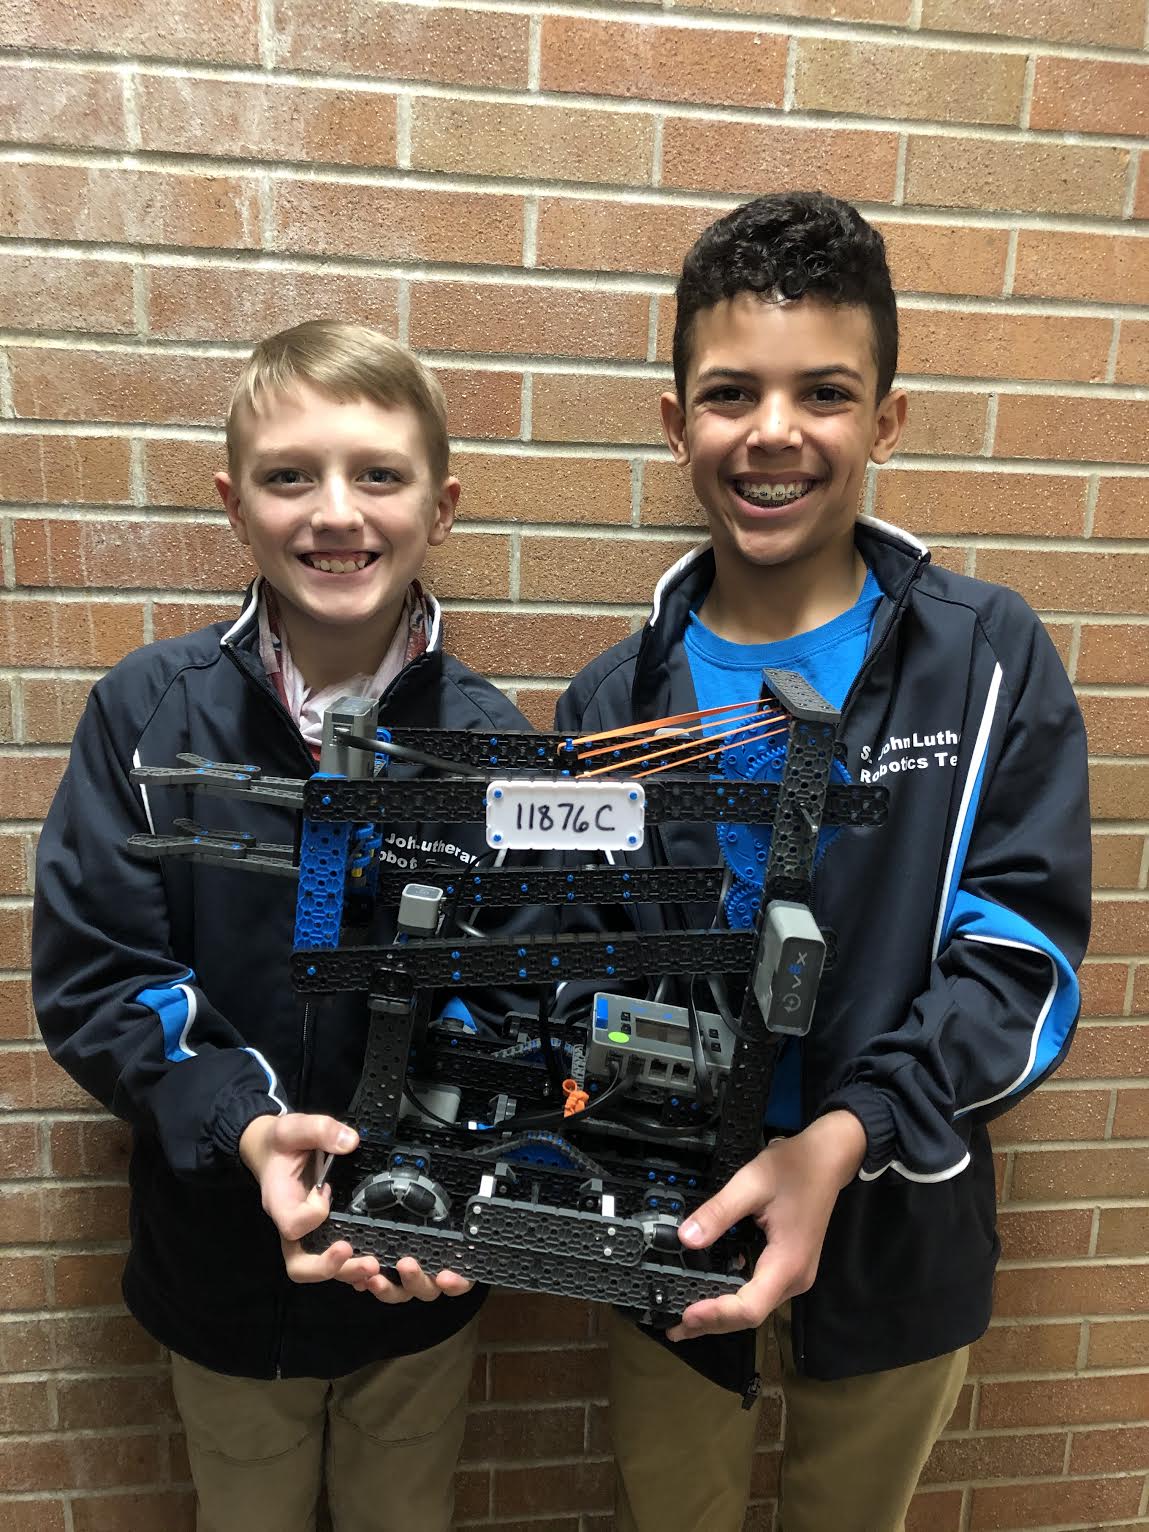 Local team wins Coveted Create Award at the largest online robot championships